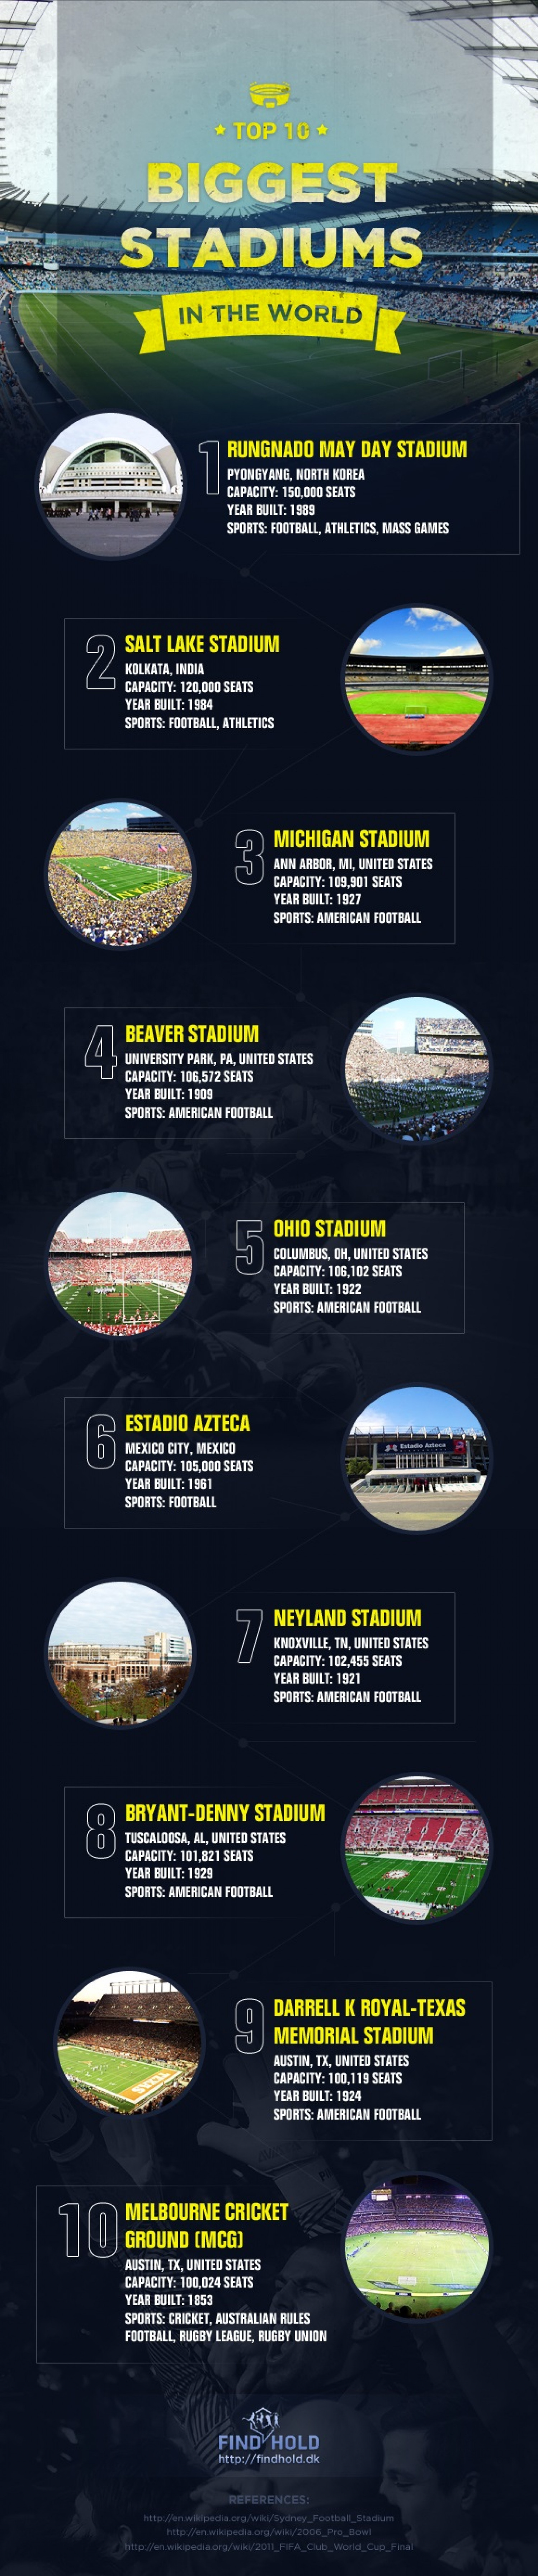 Top 10 Biggest Stadiums in the World Infographic